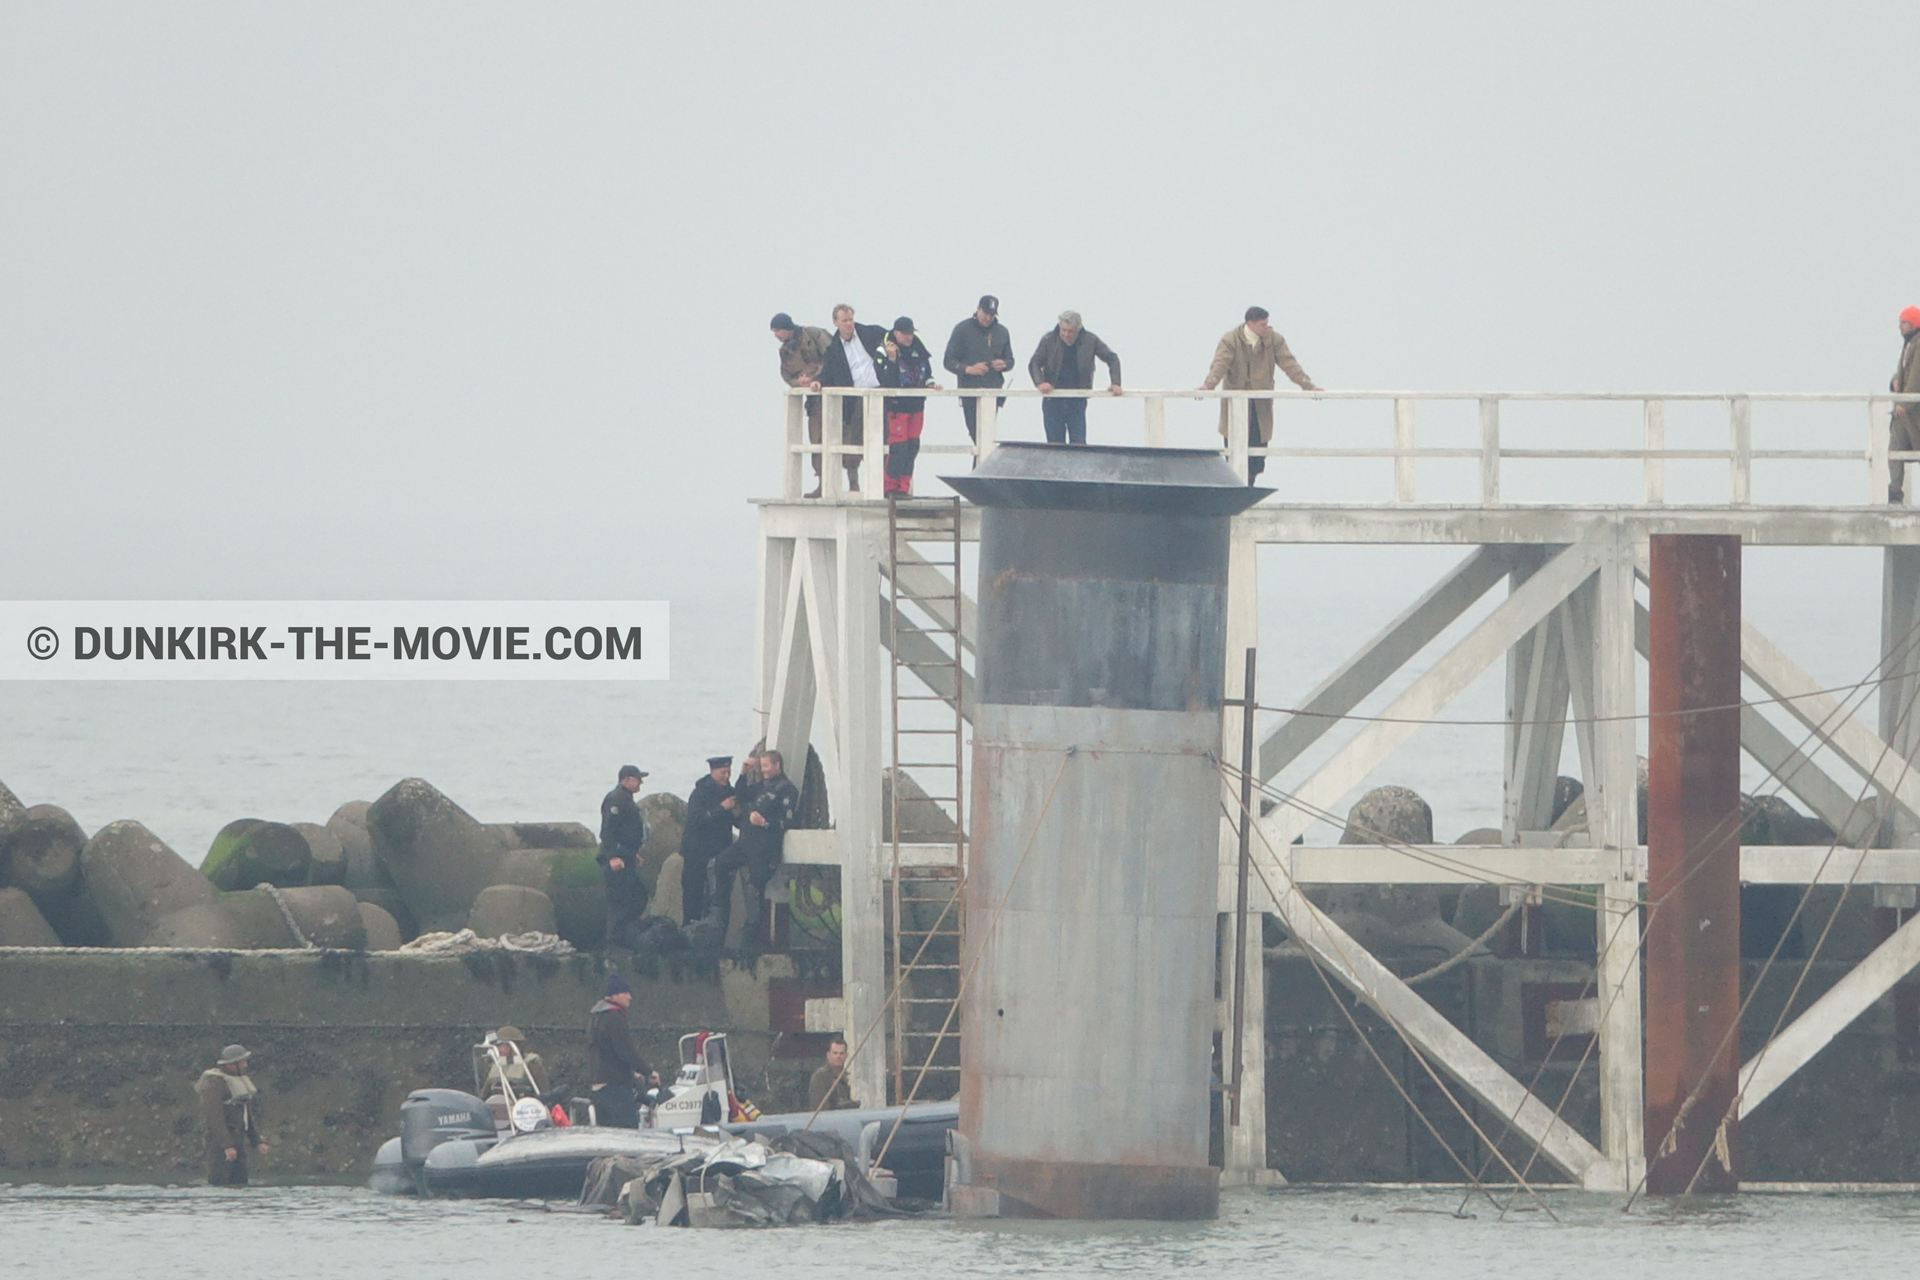 Picture with actor, grey sky, decor, supernumeraries, EST pier, Christopher Nolan, technical team, Nilo Otero,  from behind the scene of the Dunkirk movie by Nolan